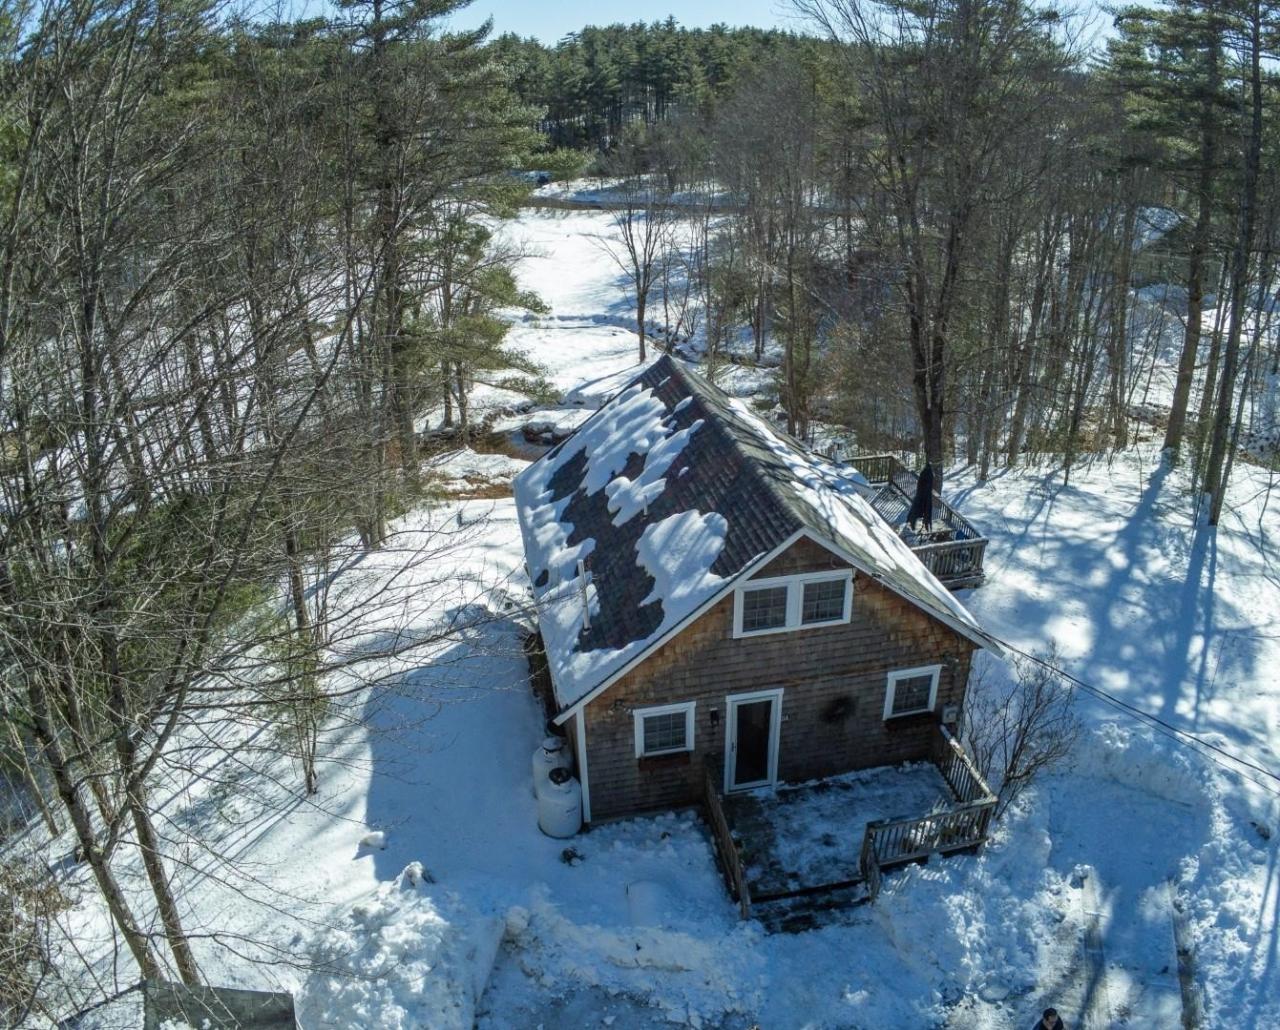  Floor Plan 51 Mill pond Road, Wakefield, NH 03830: Homes for Sale - Hommati  a662dcafec2985c3093e7a32a2e0747a